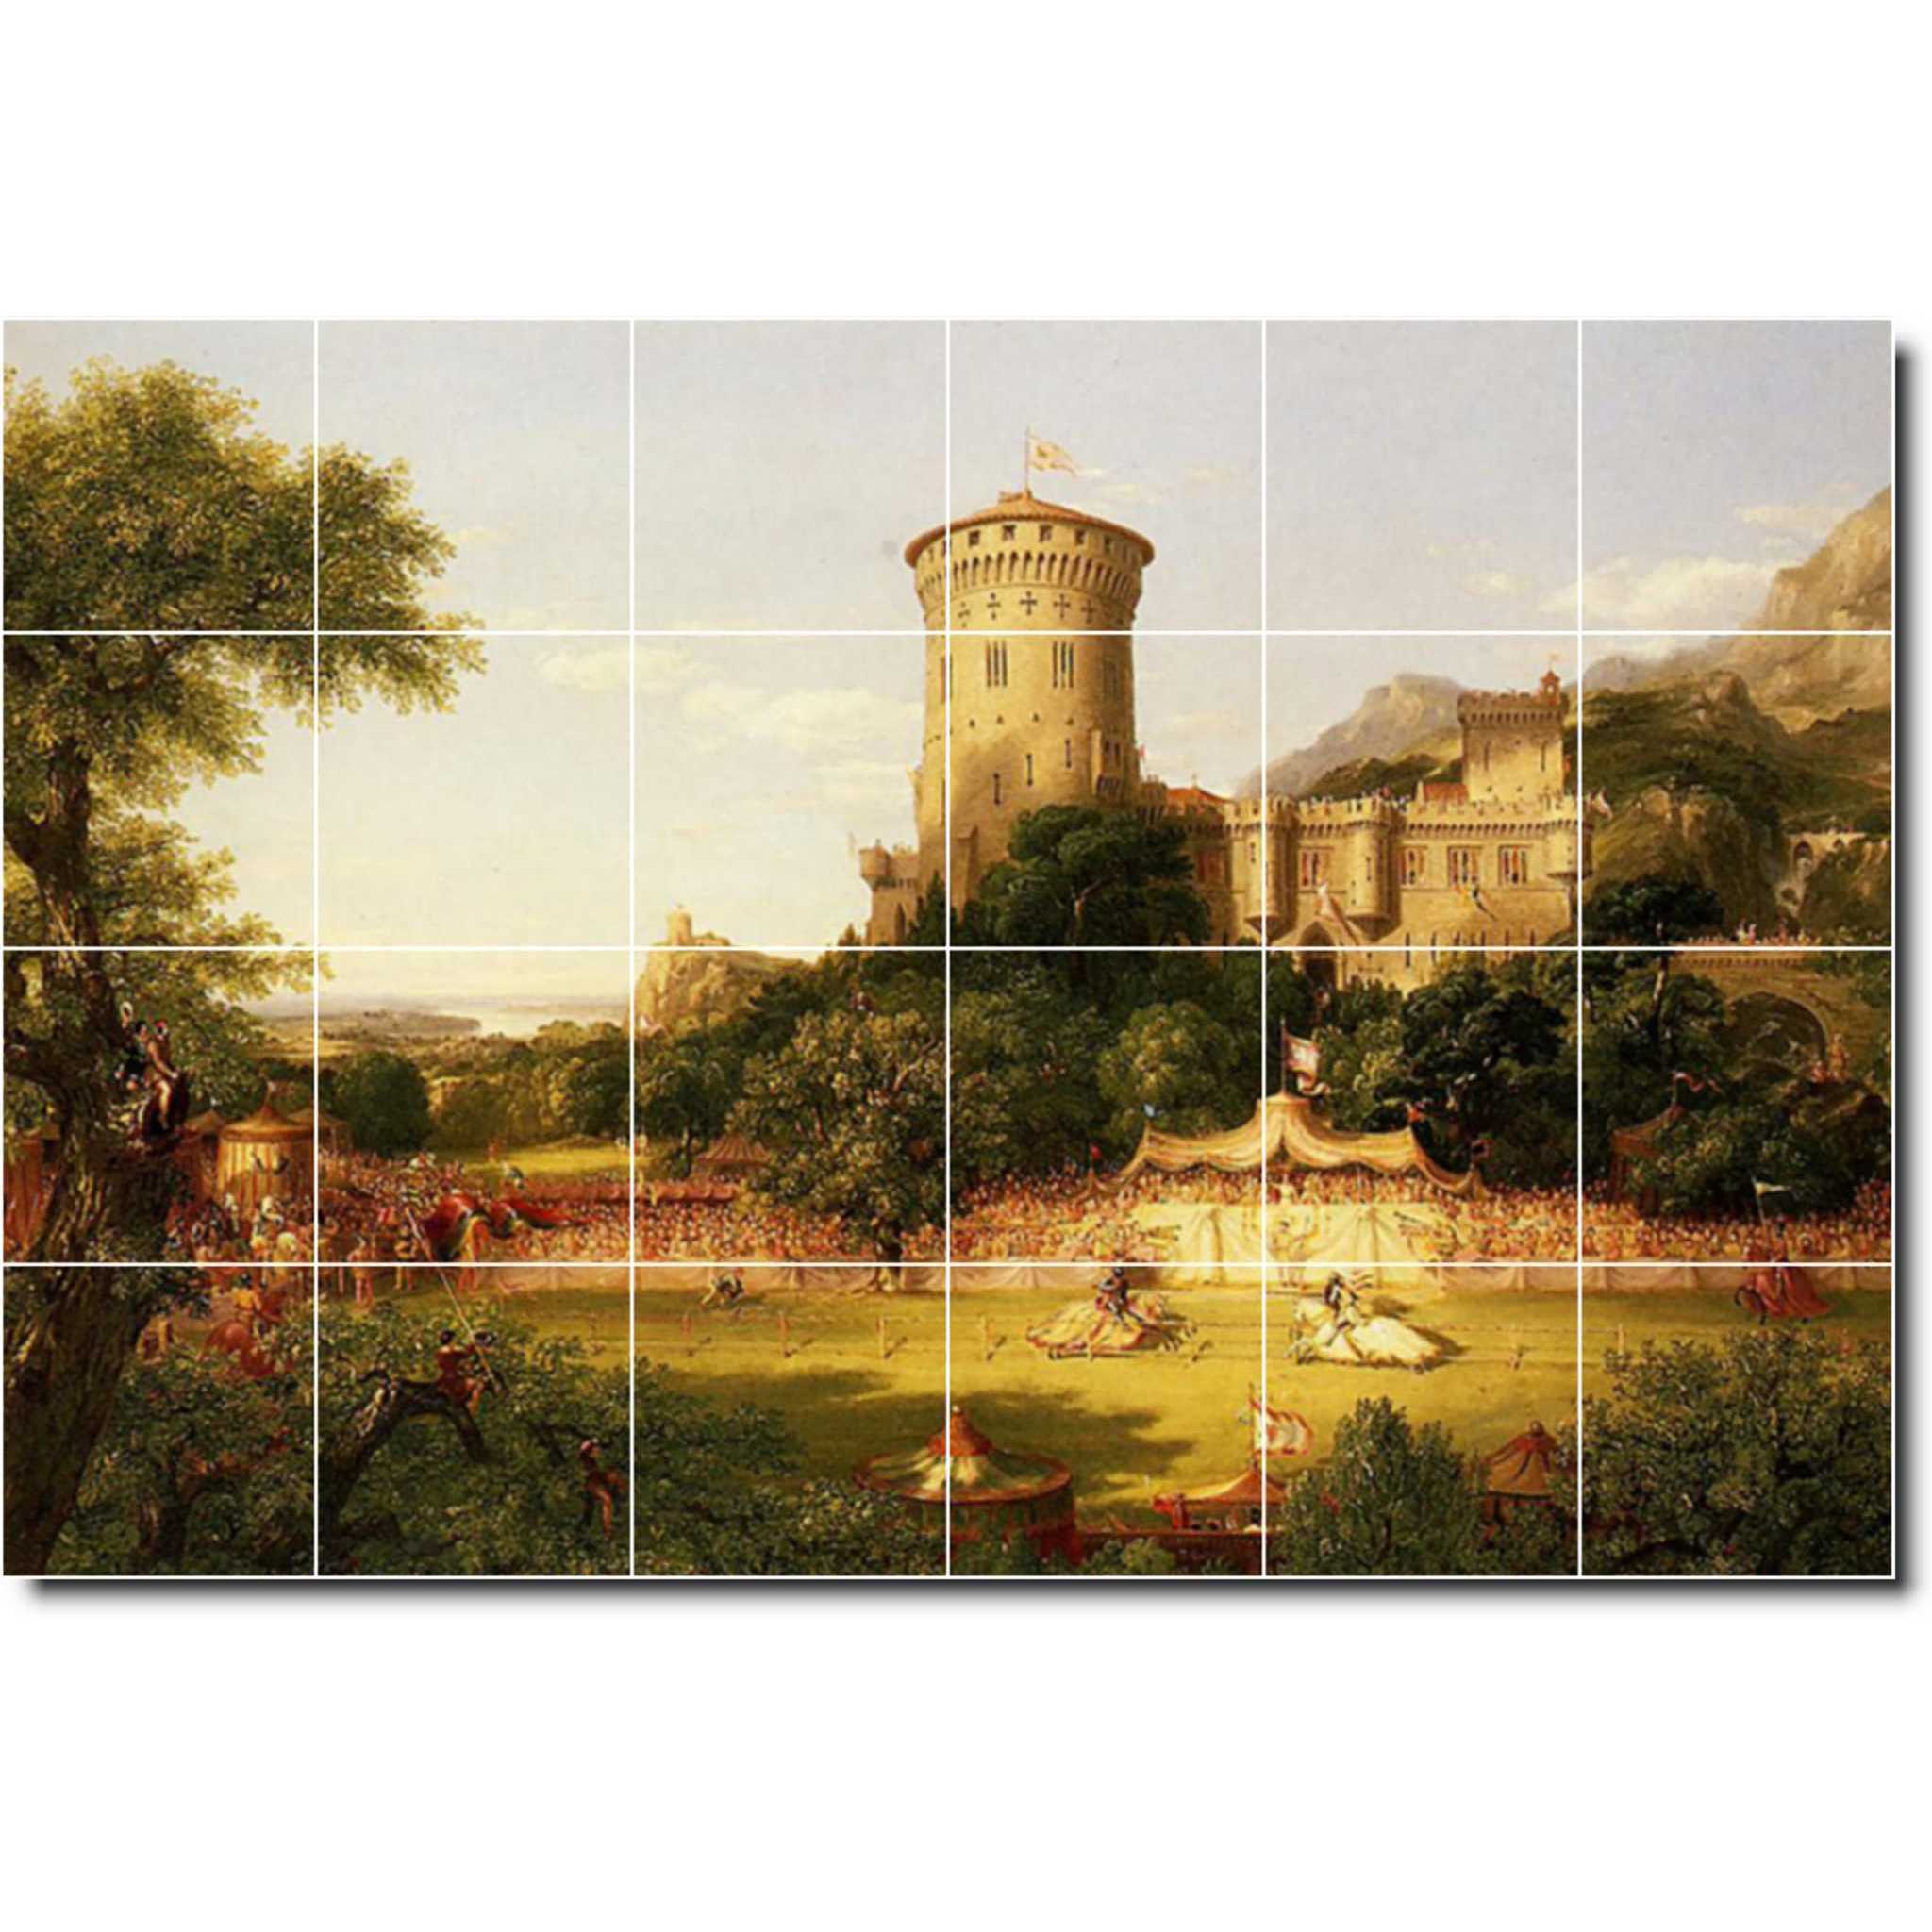 thomas cole historical painting ceramic tile mural p01887